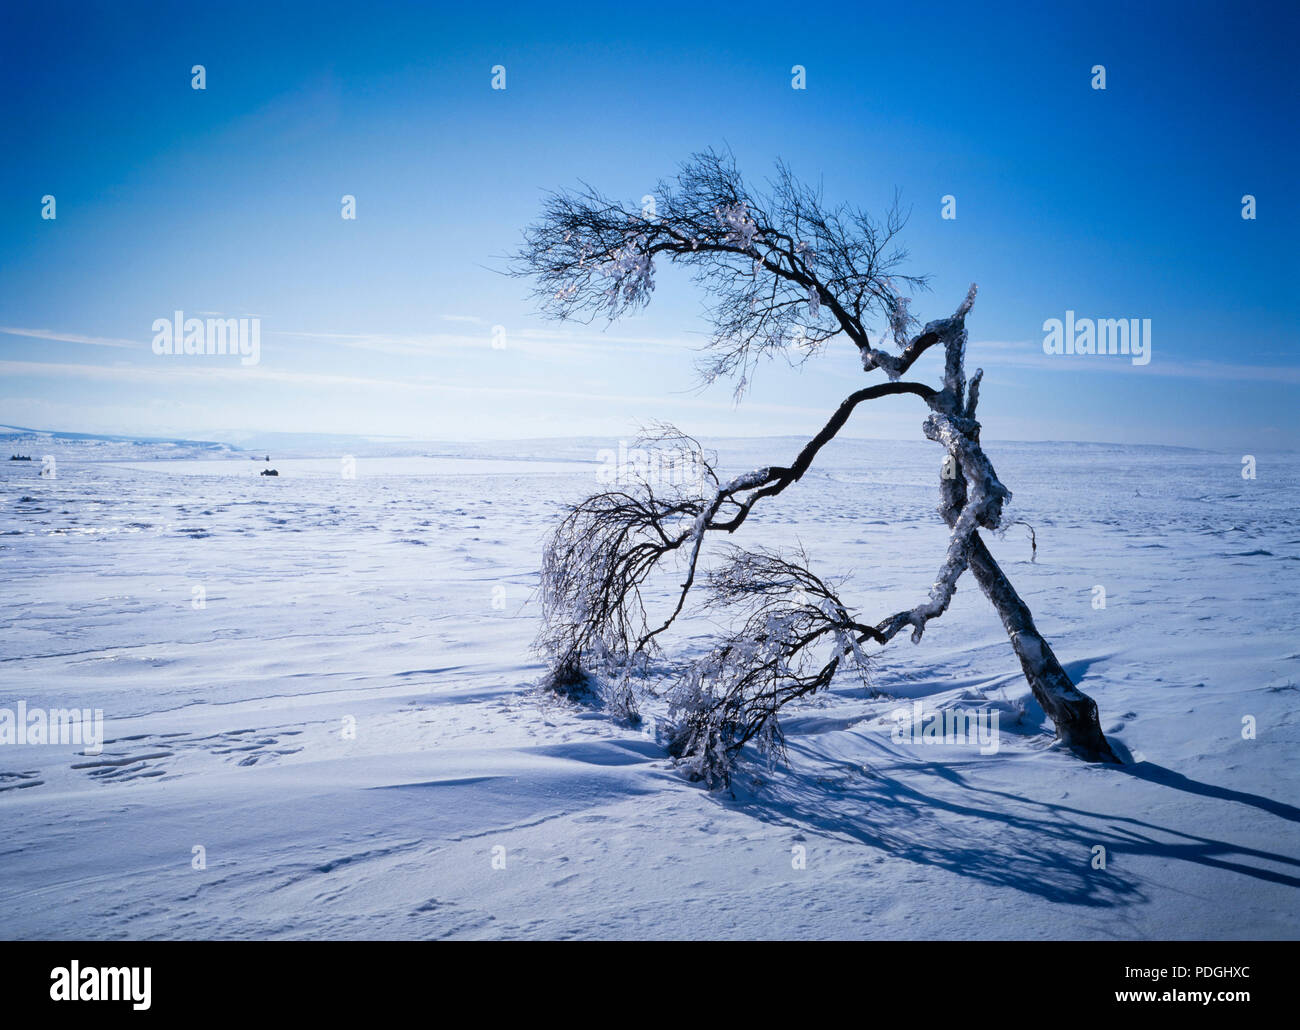 A windswept, ice-covered bare lone tree in midwinter on Totley Moor, Derbyshire, near Sheffield. Stock Photo